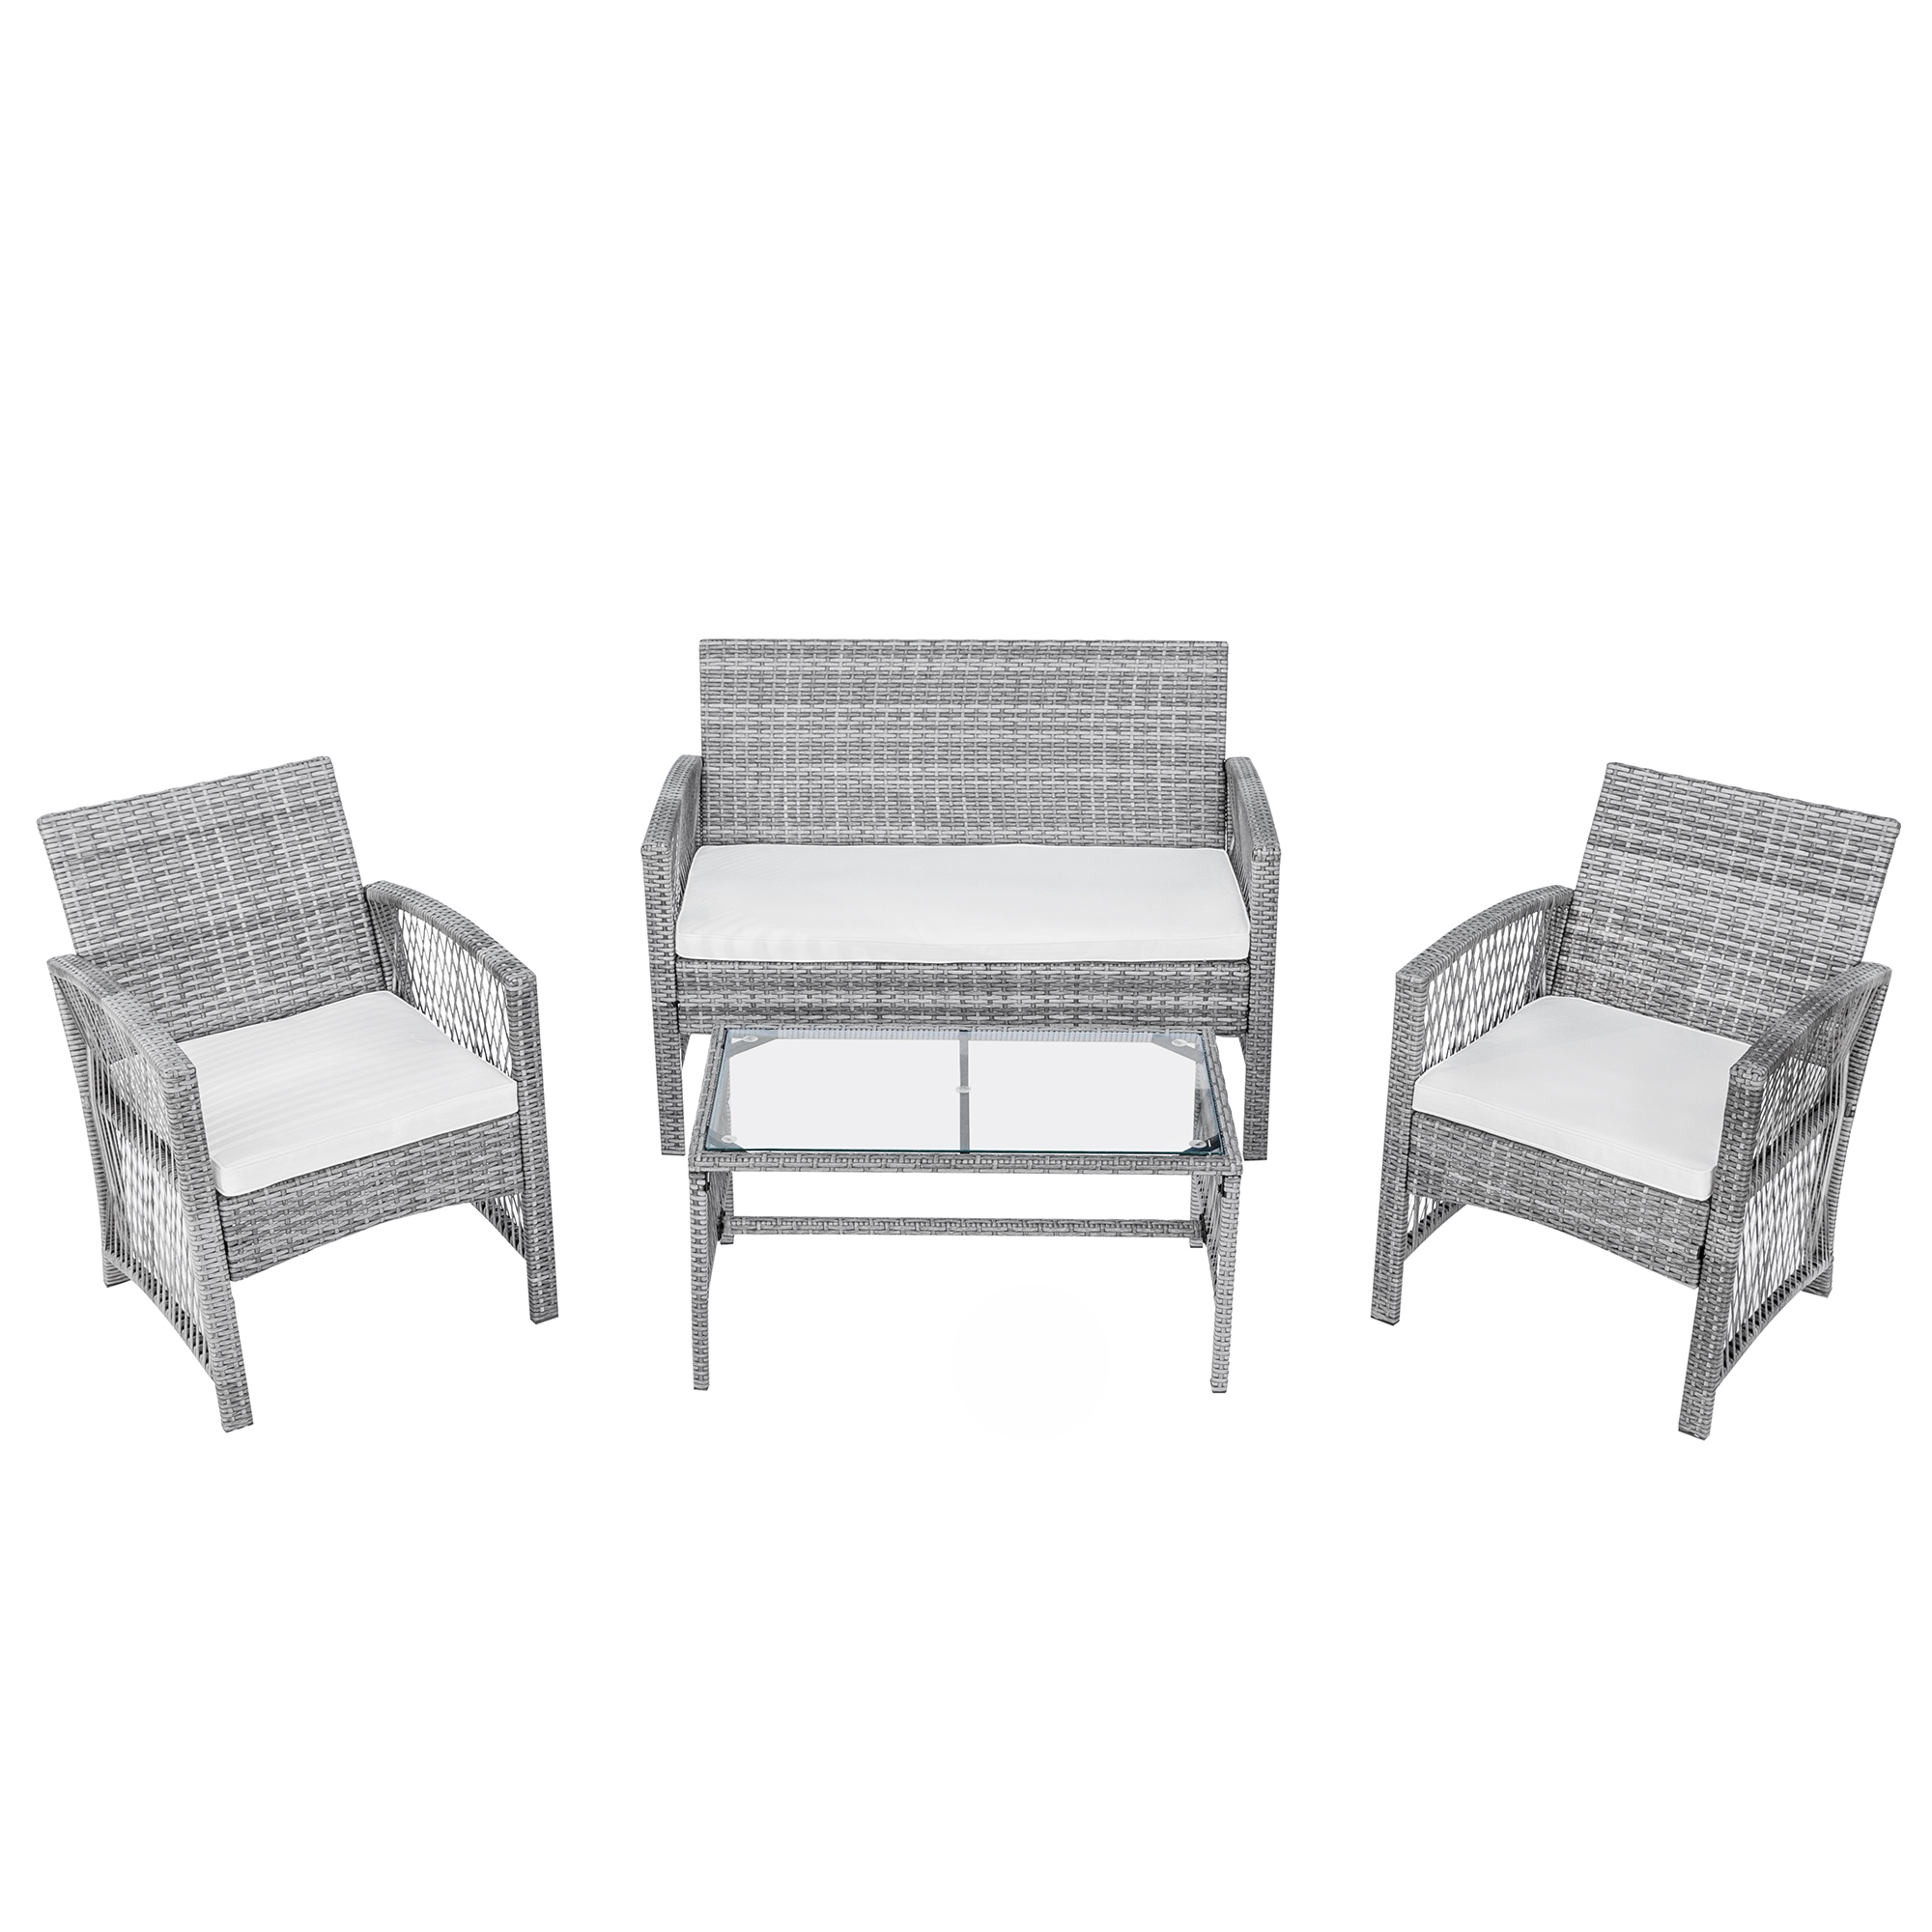 4-Piece Patio Furniture Sets in Patio & Garden, Outdoor Wicker Rattan with Two Single Sofa, One Loveseat, Tempered Glass Table, Q8602 - image 5 of 12